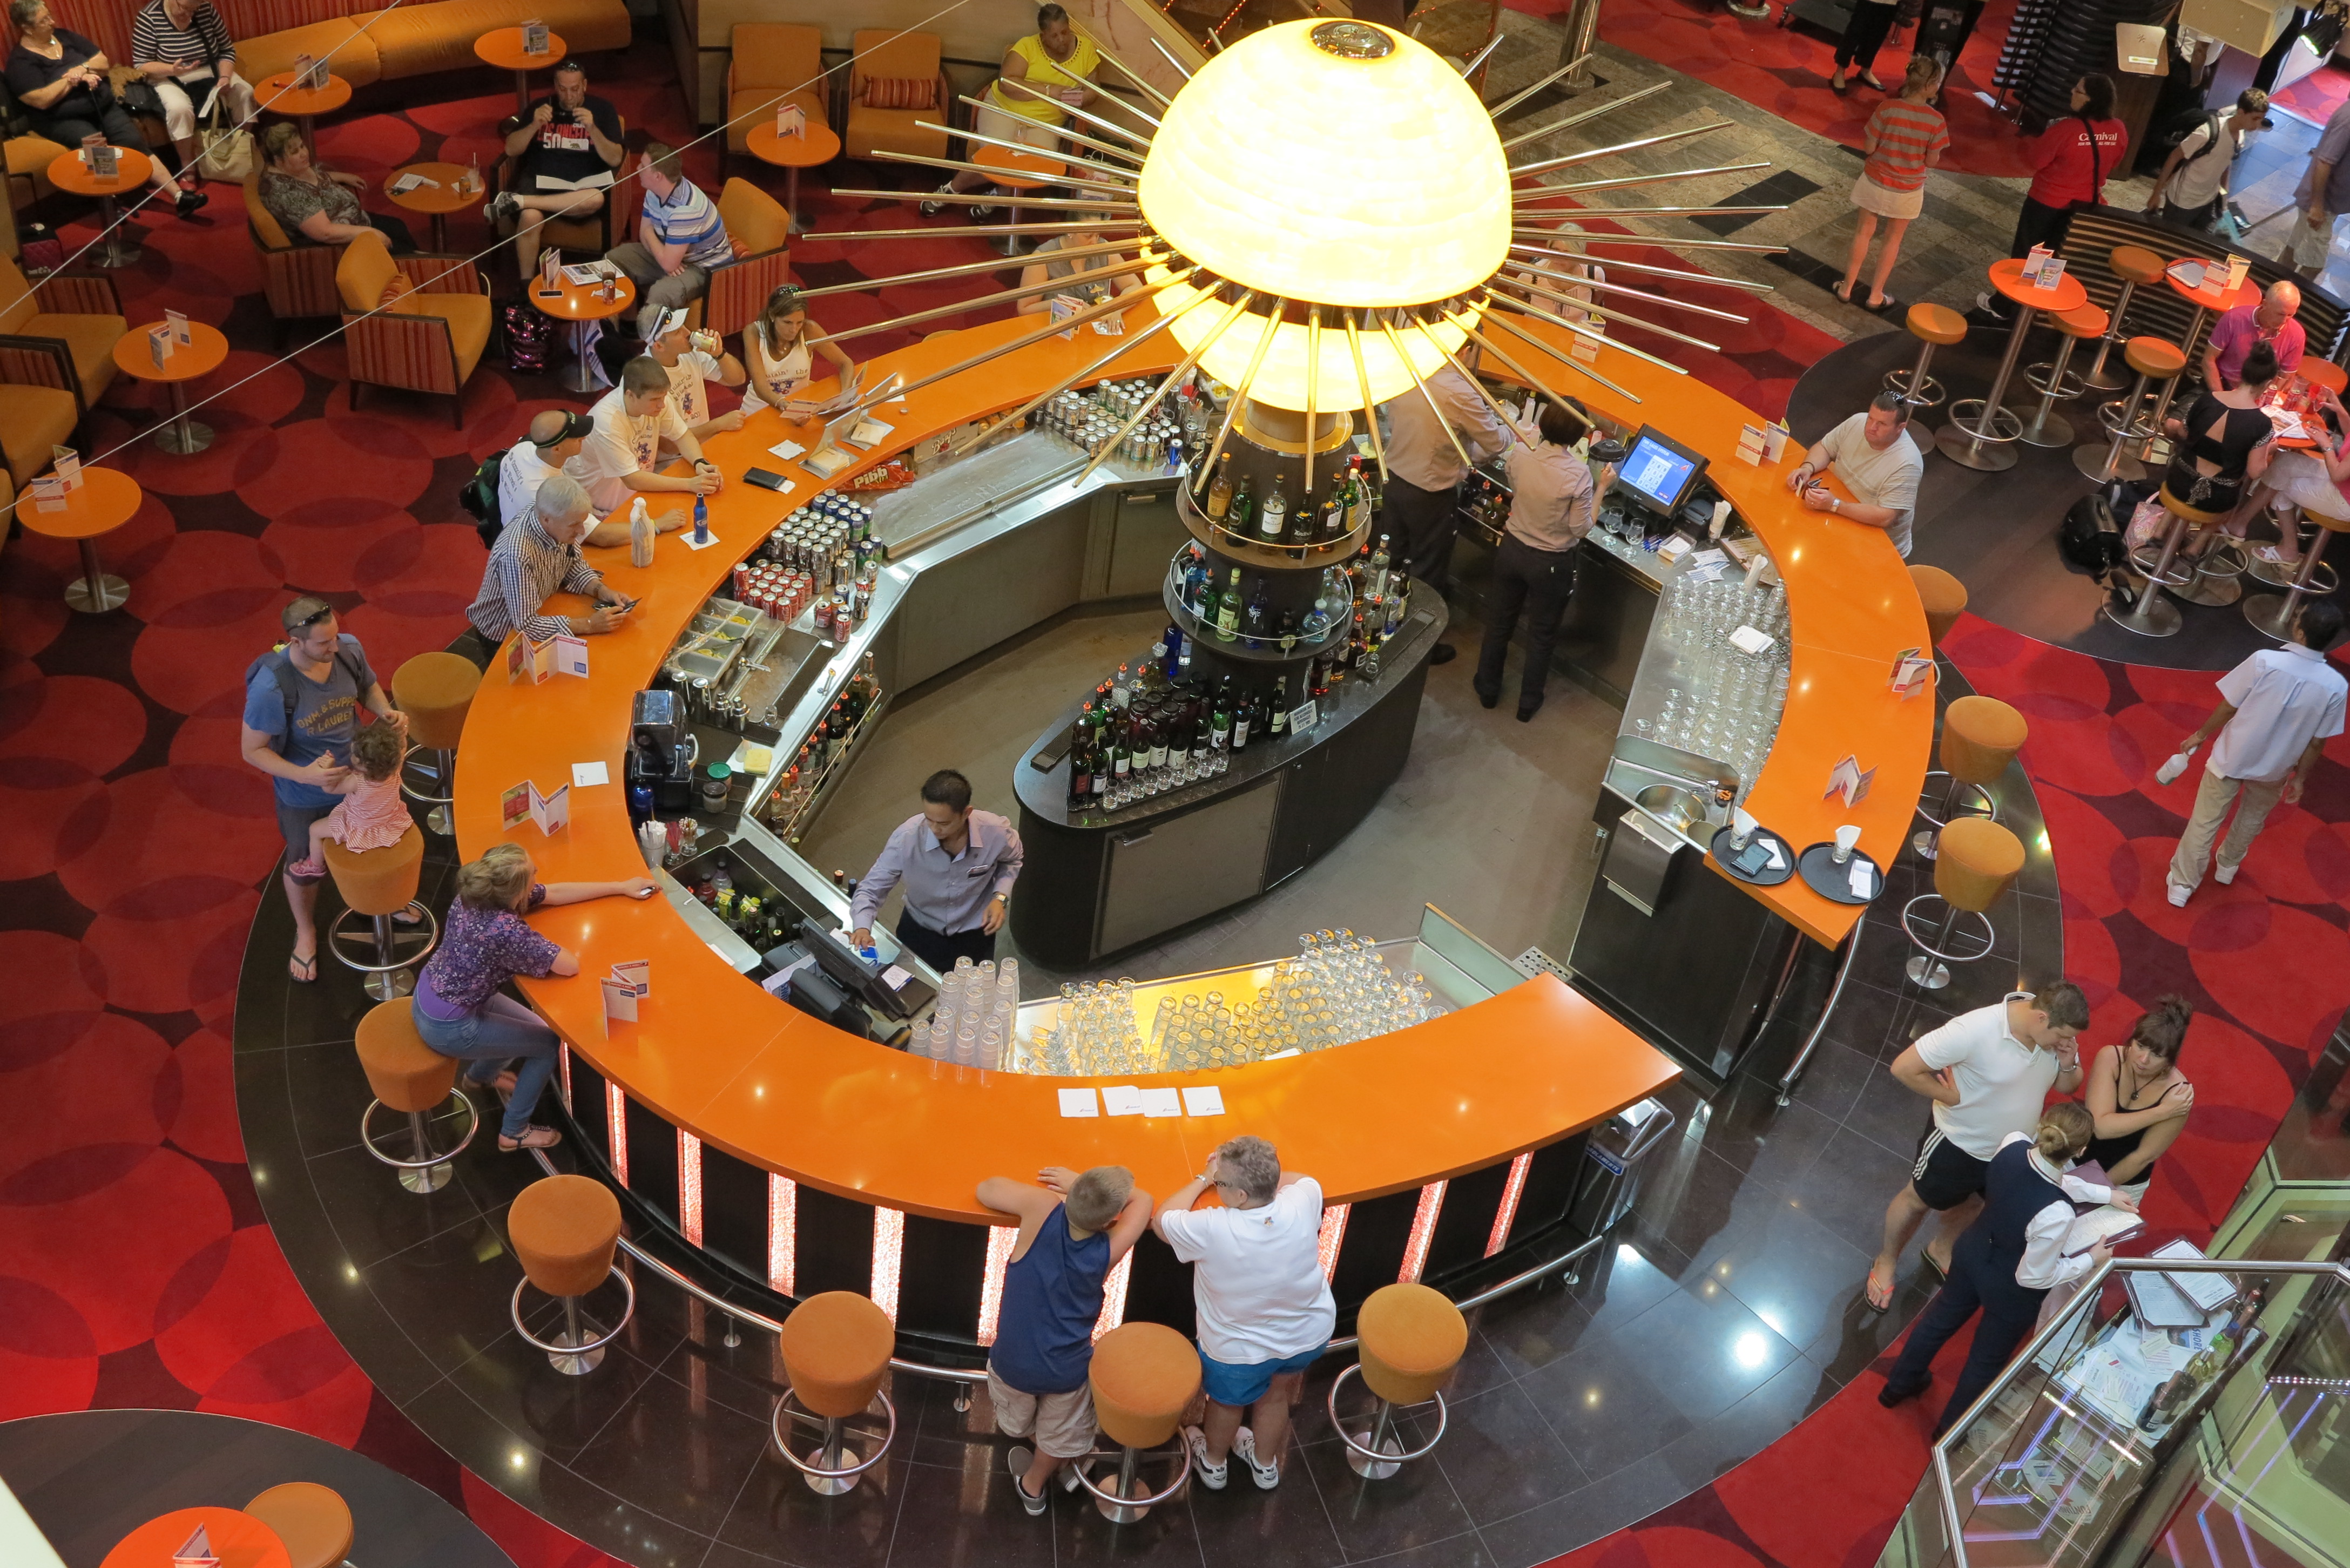 At the centre of things: The atrium bar